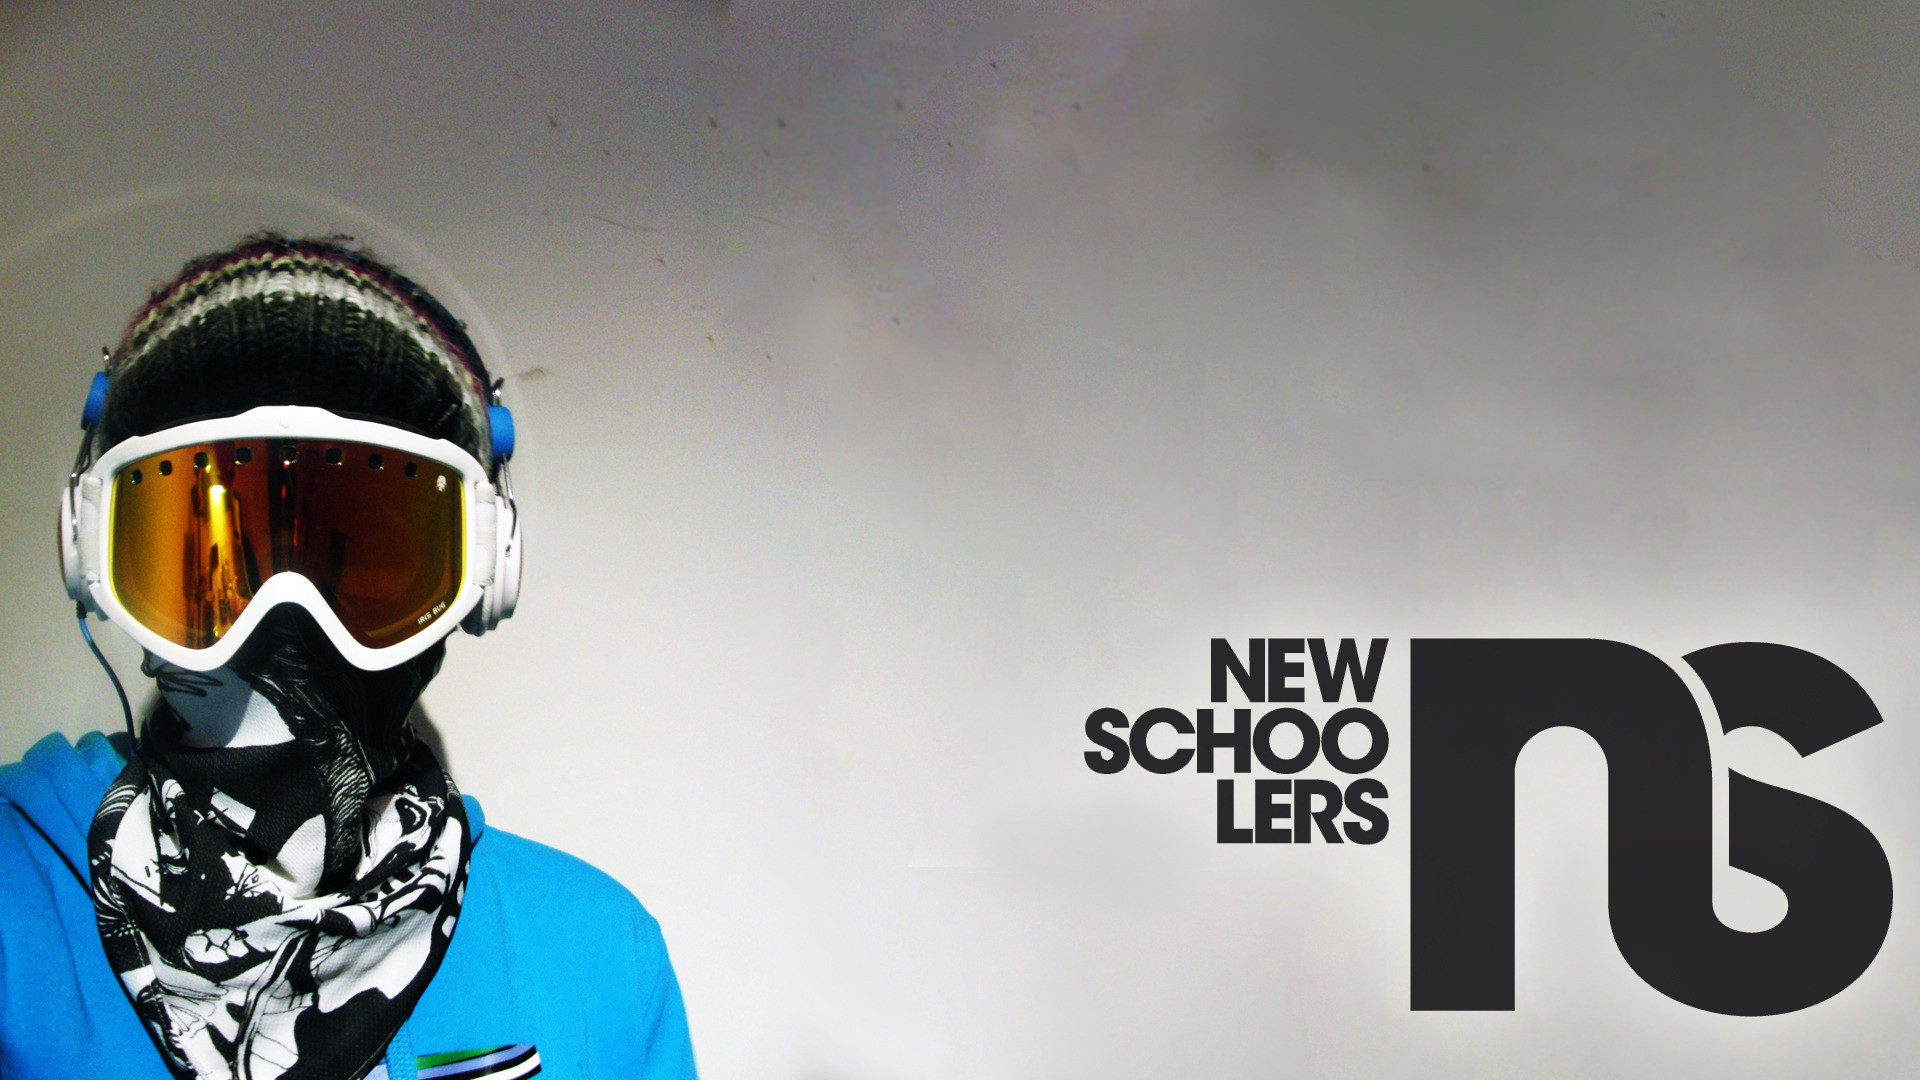 1920x1080 Search Results for “snowboarding brands wallpaper” – Adorable Wallpapers